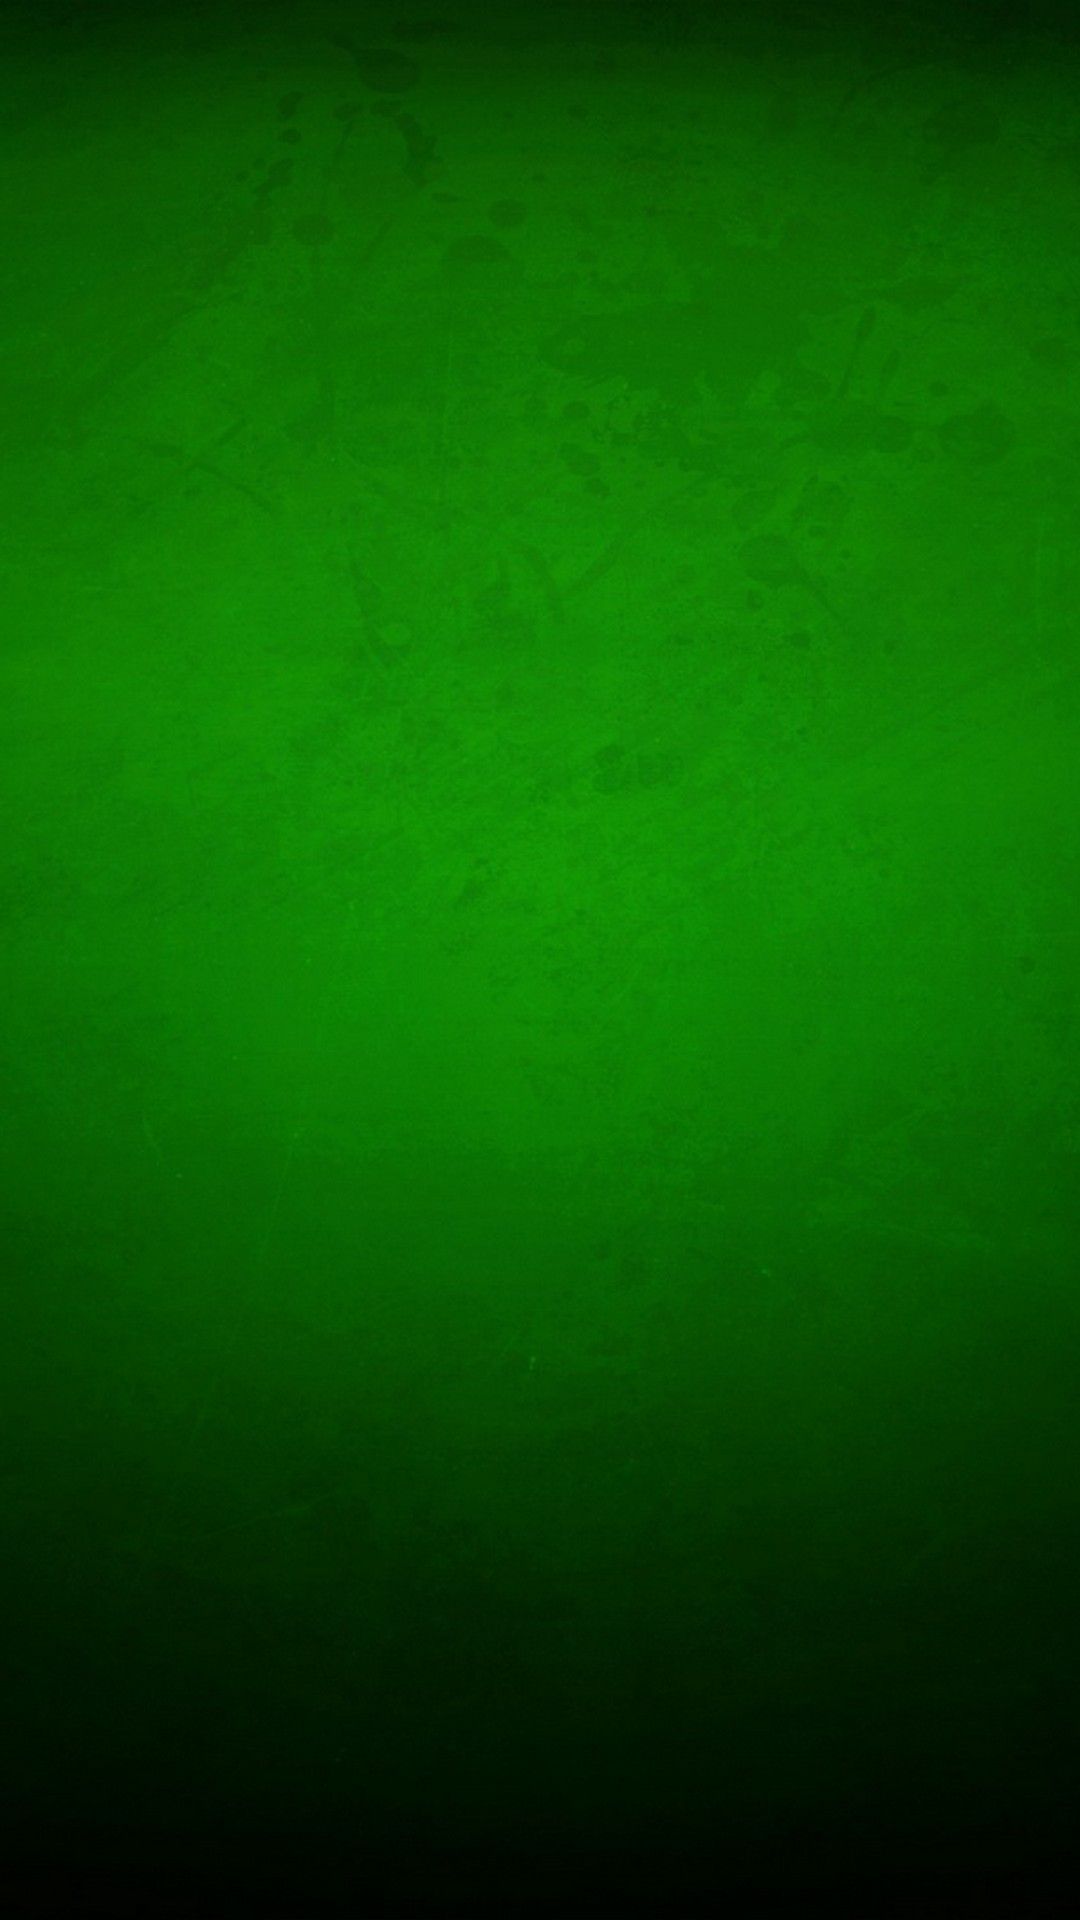 Wallpaper Phone Black and Green Android Wallpaper